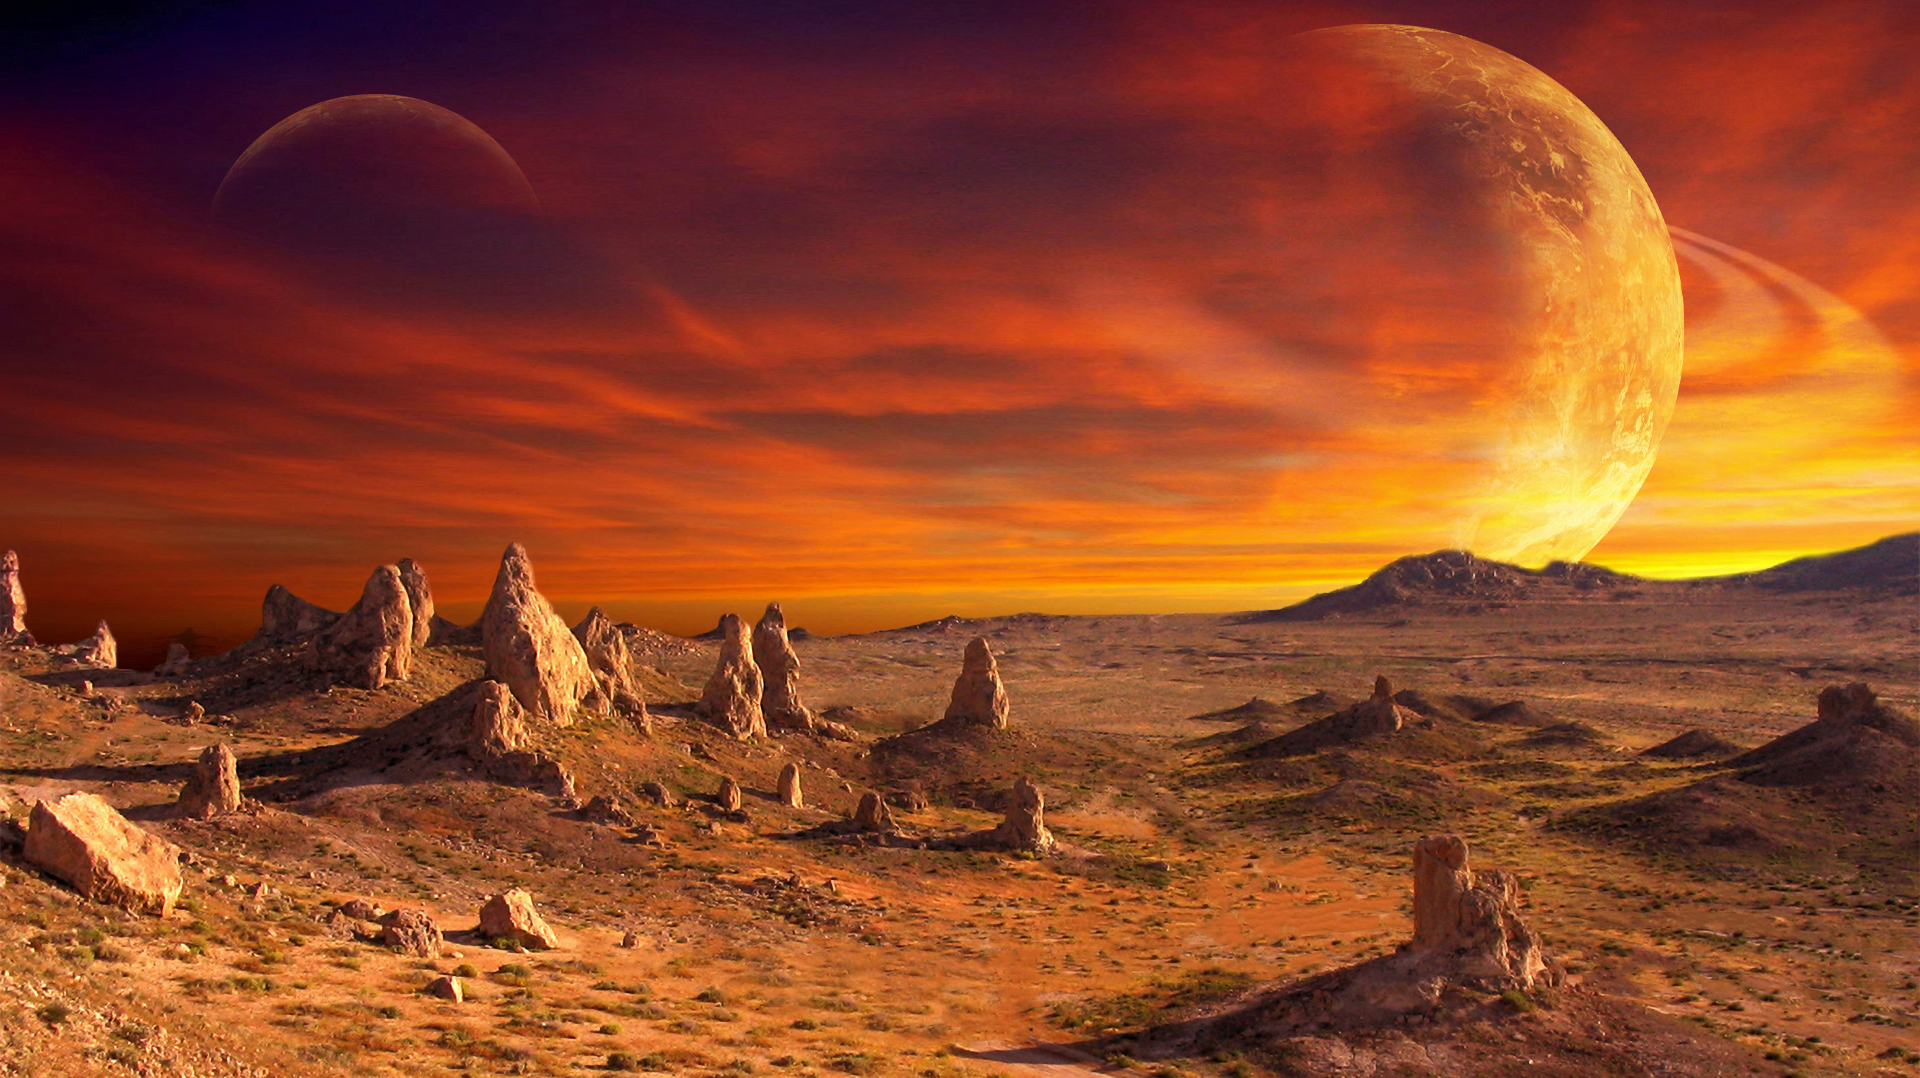 Download Cinematic Mars Landscape view from the land hd 4k image |  CorelDraw Design (Download Free CDR, Vector, Stock Images, Tutorials, Tips  & Tricks)